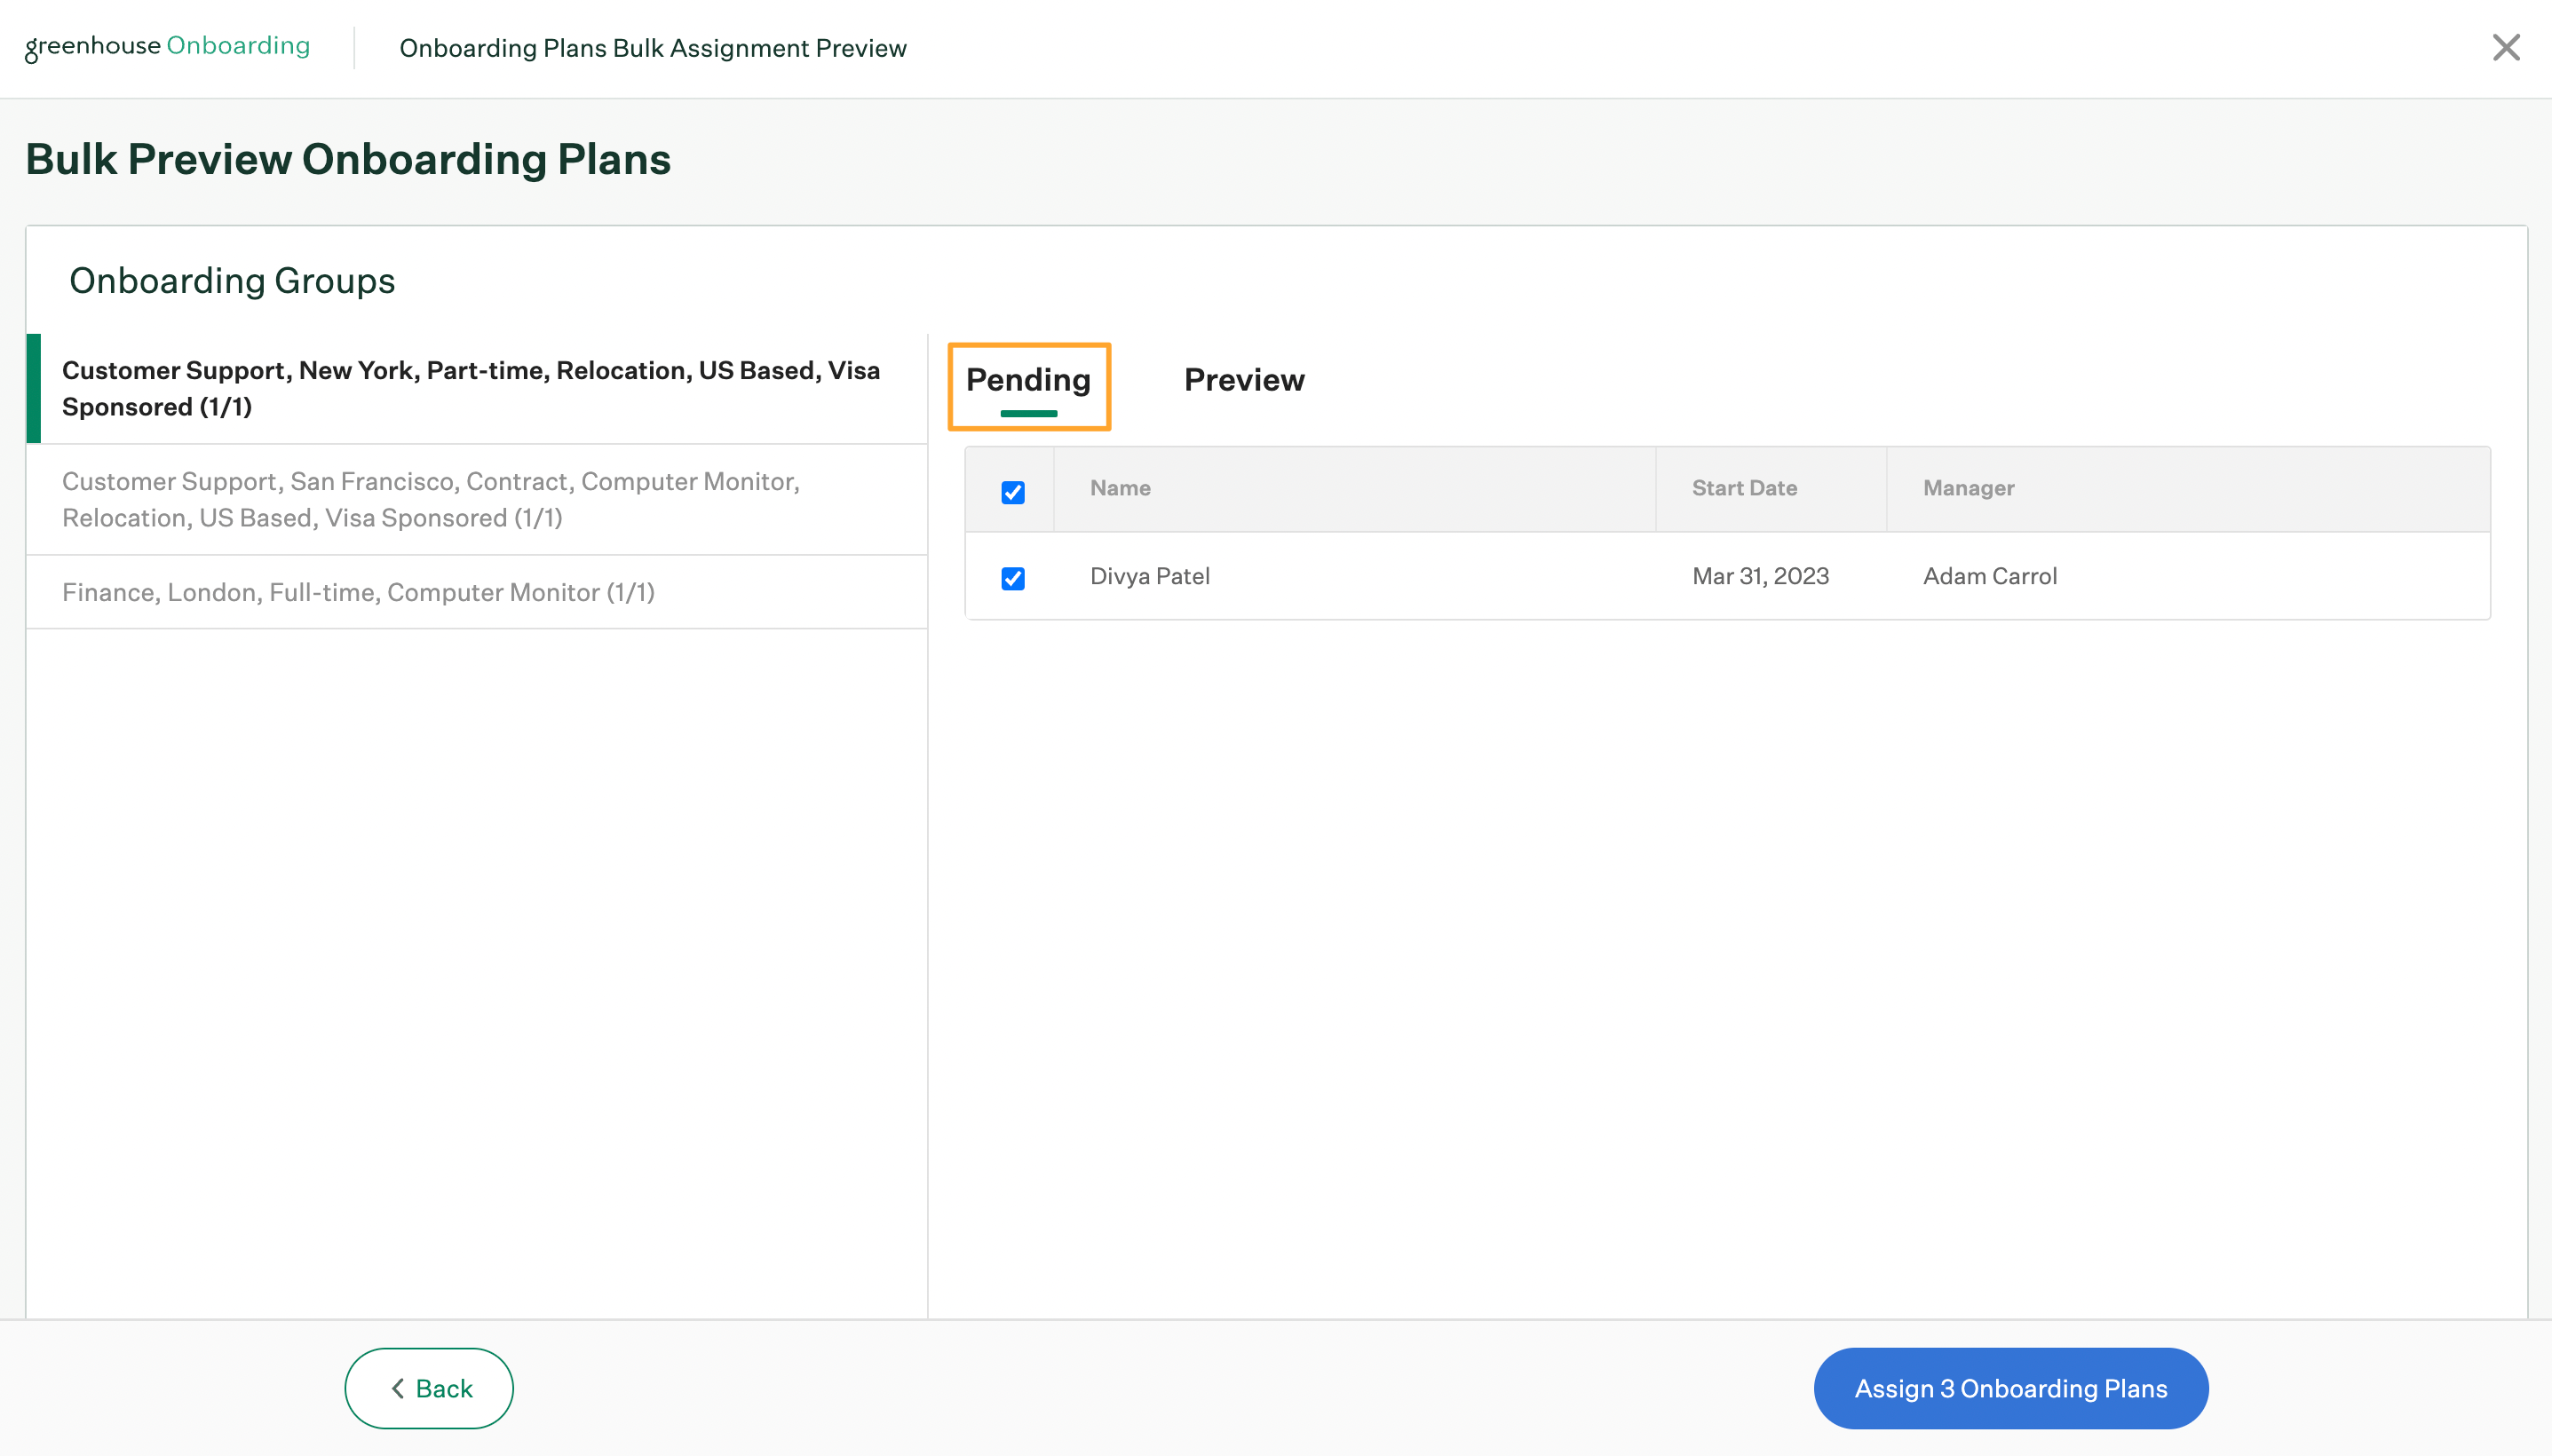 Bulk-preview-onboarding-plans-page-with-pending-tab-highlighted.png